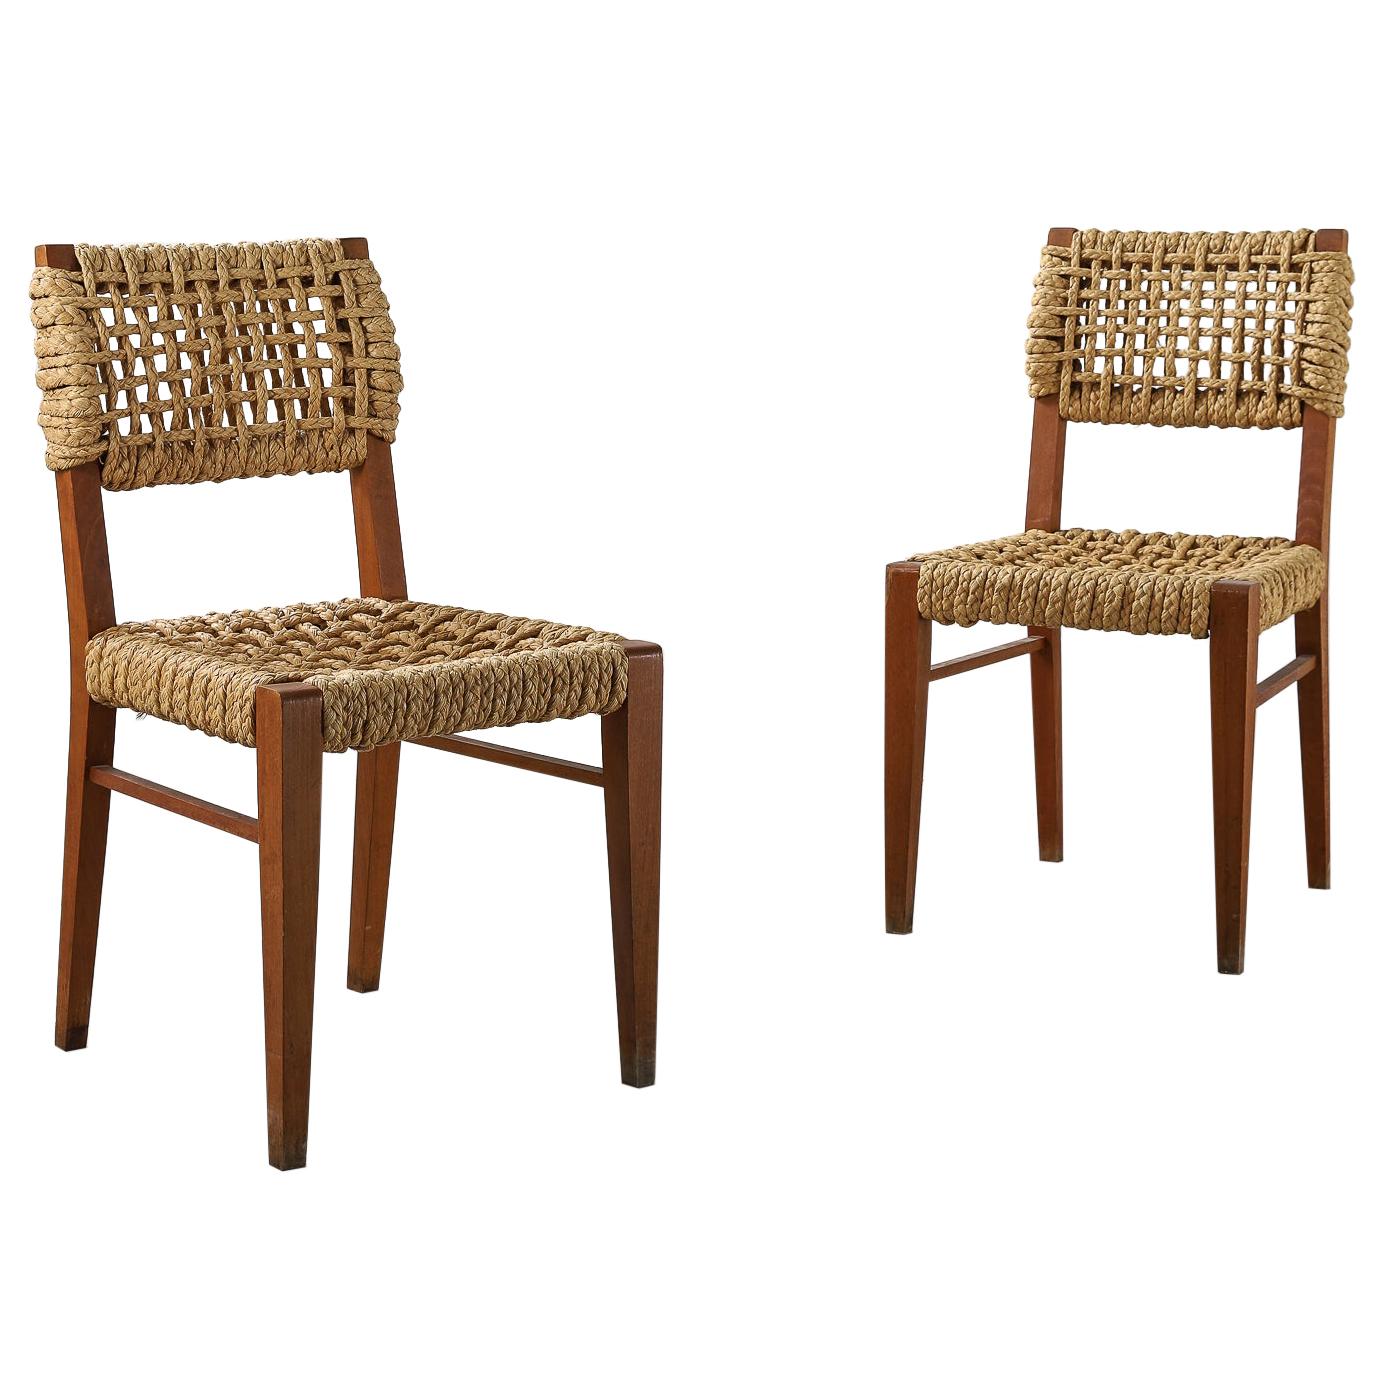 Pair of Beech & Woven Rope Dining Chairs by Adrien Audoux and Frida Minet, 1950s